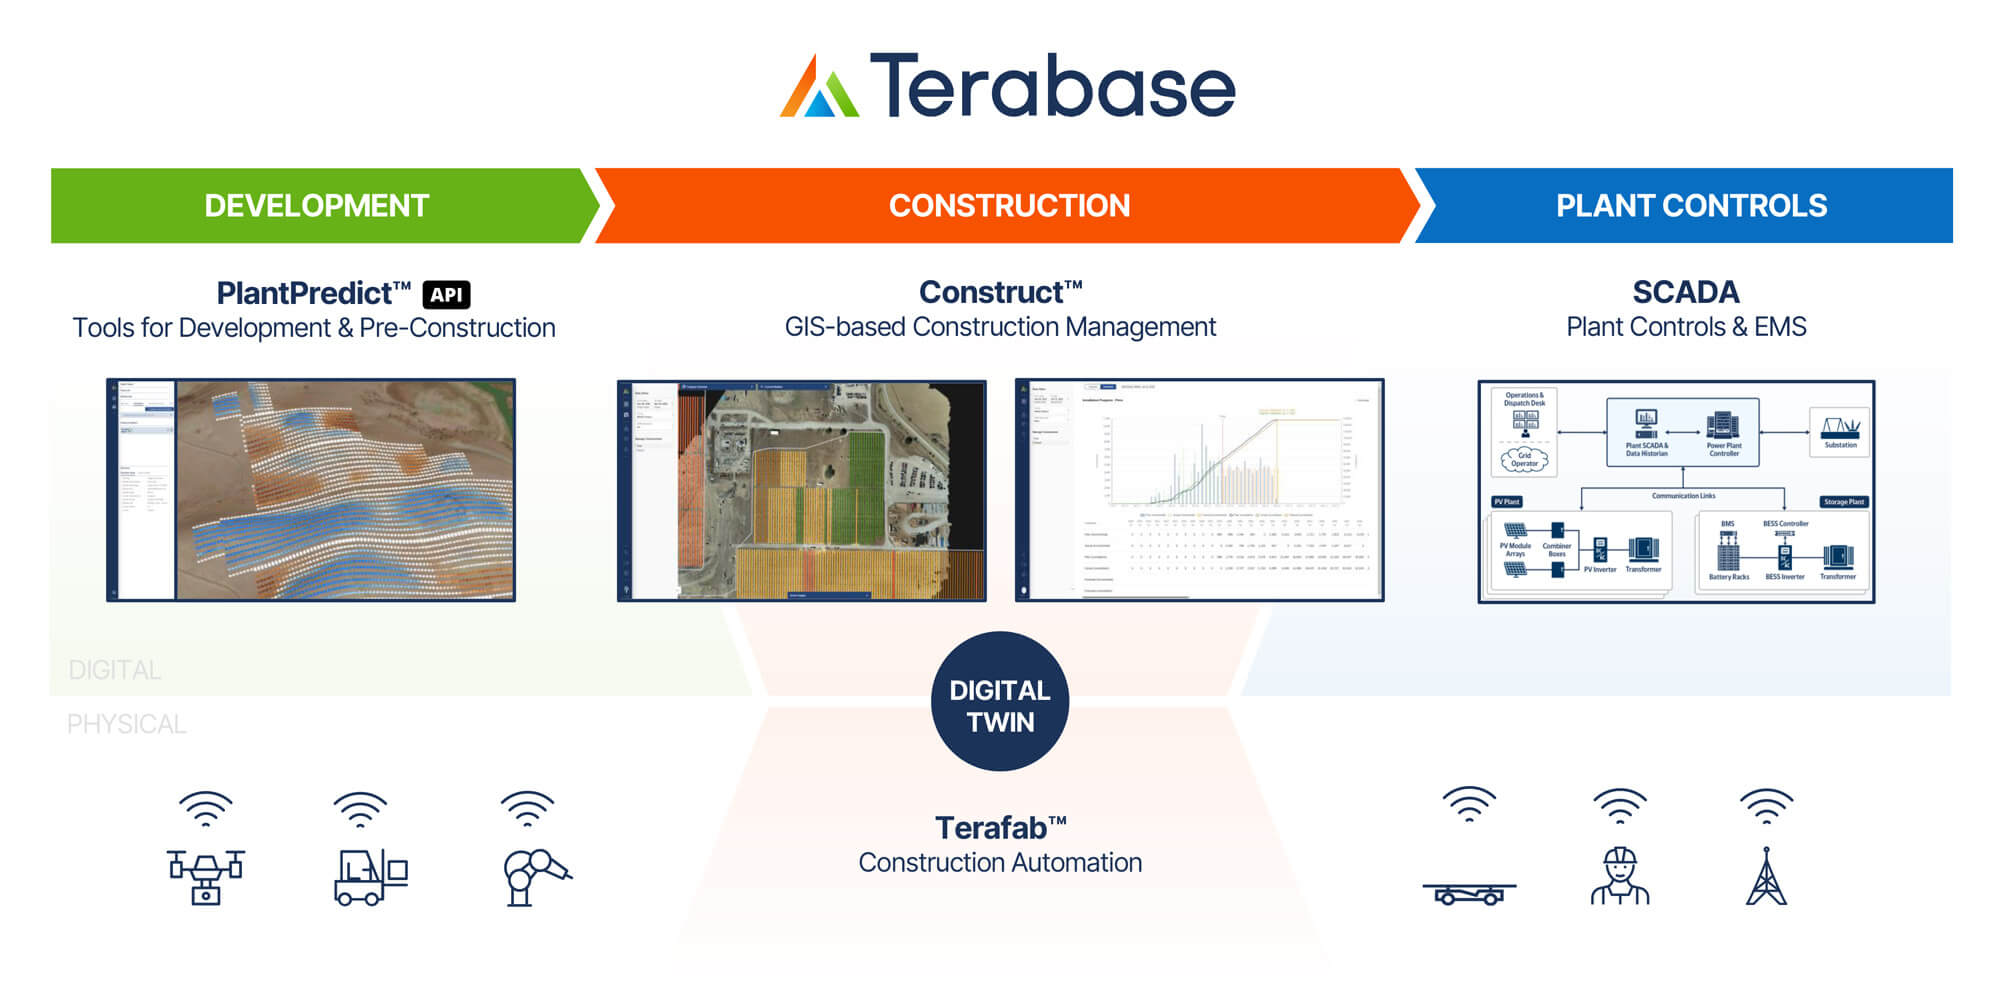 Terabase Products & Services Ecosystem